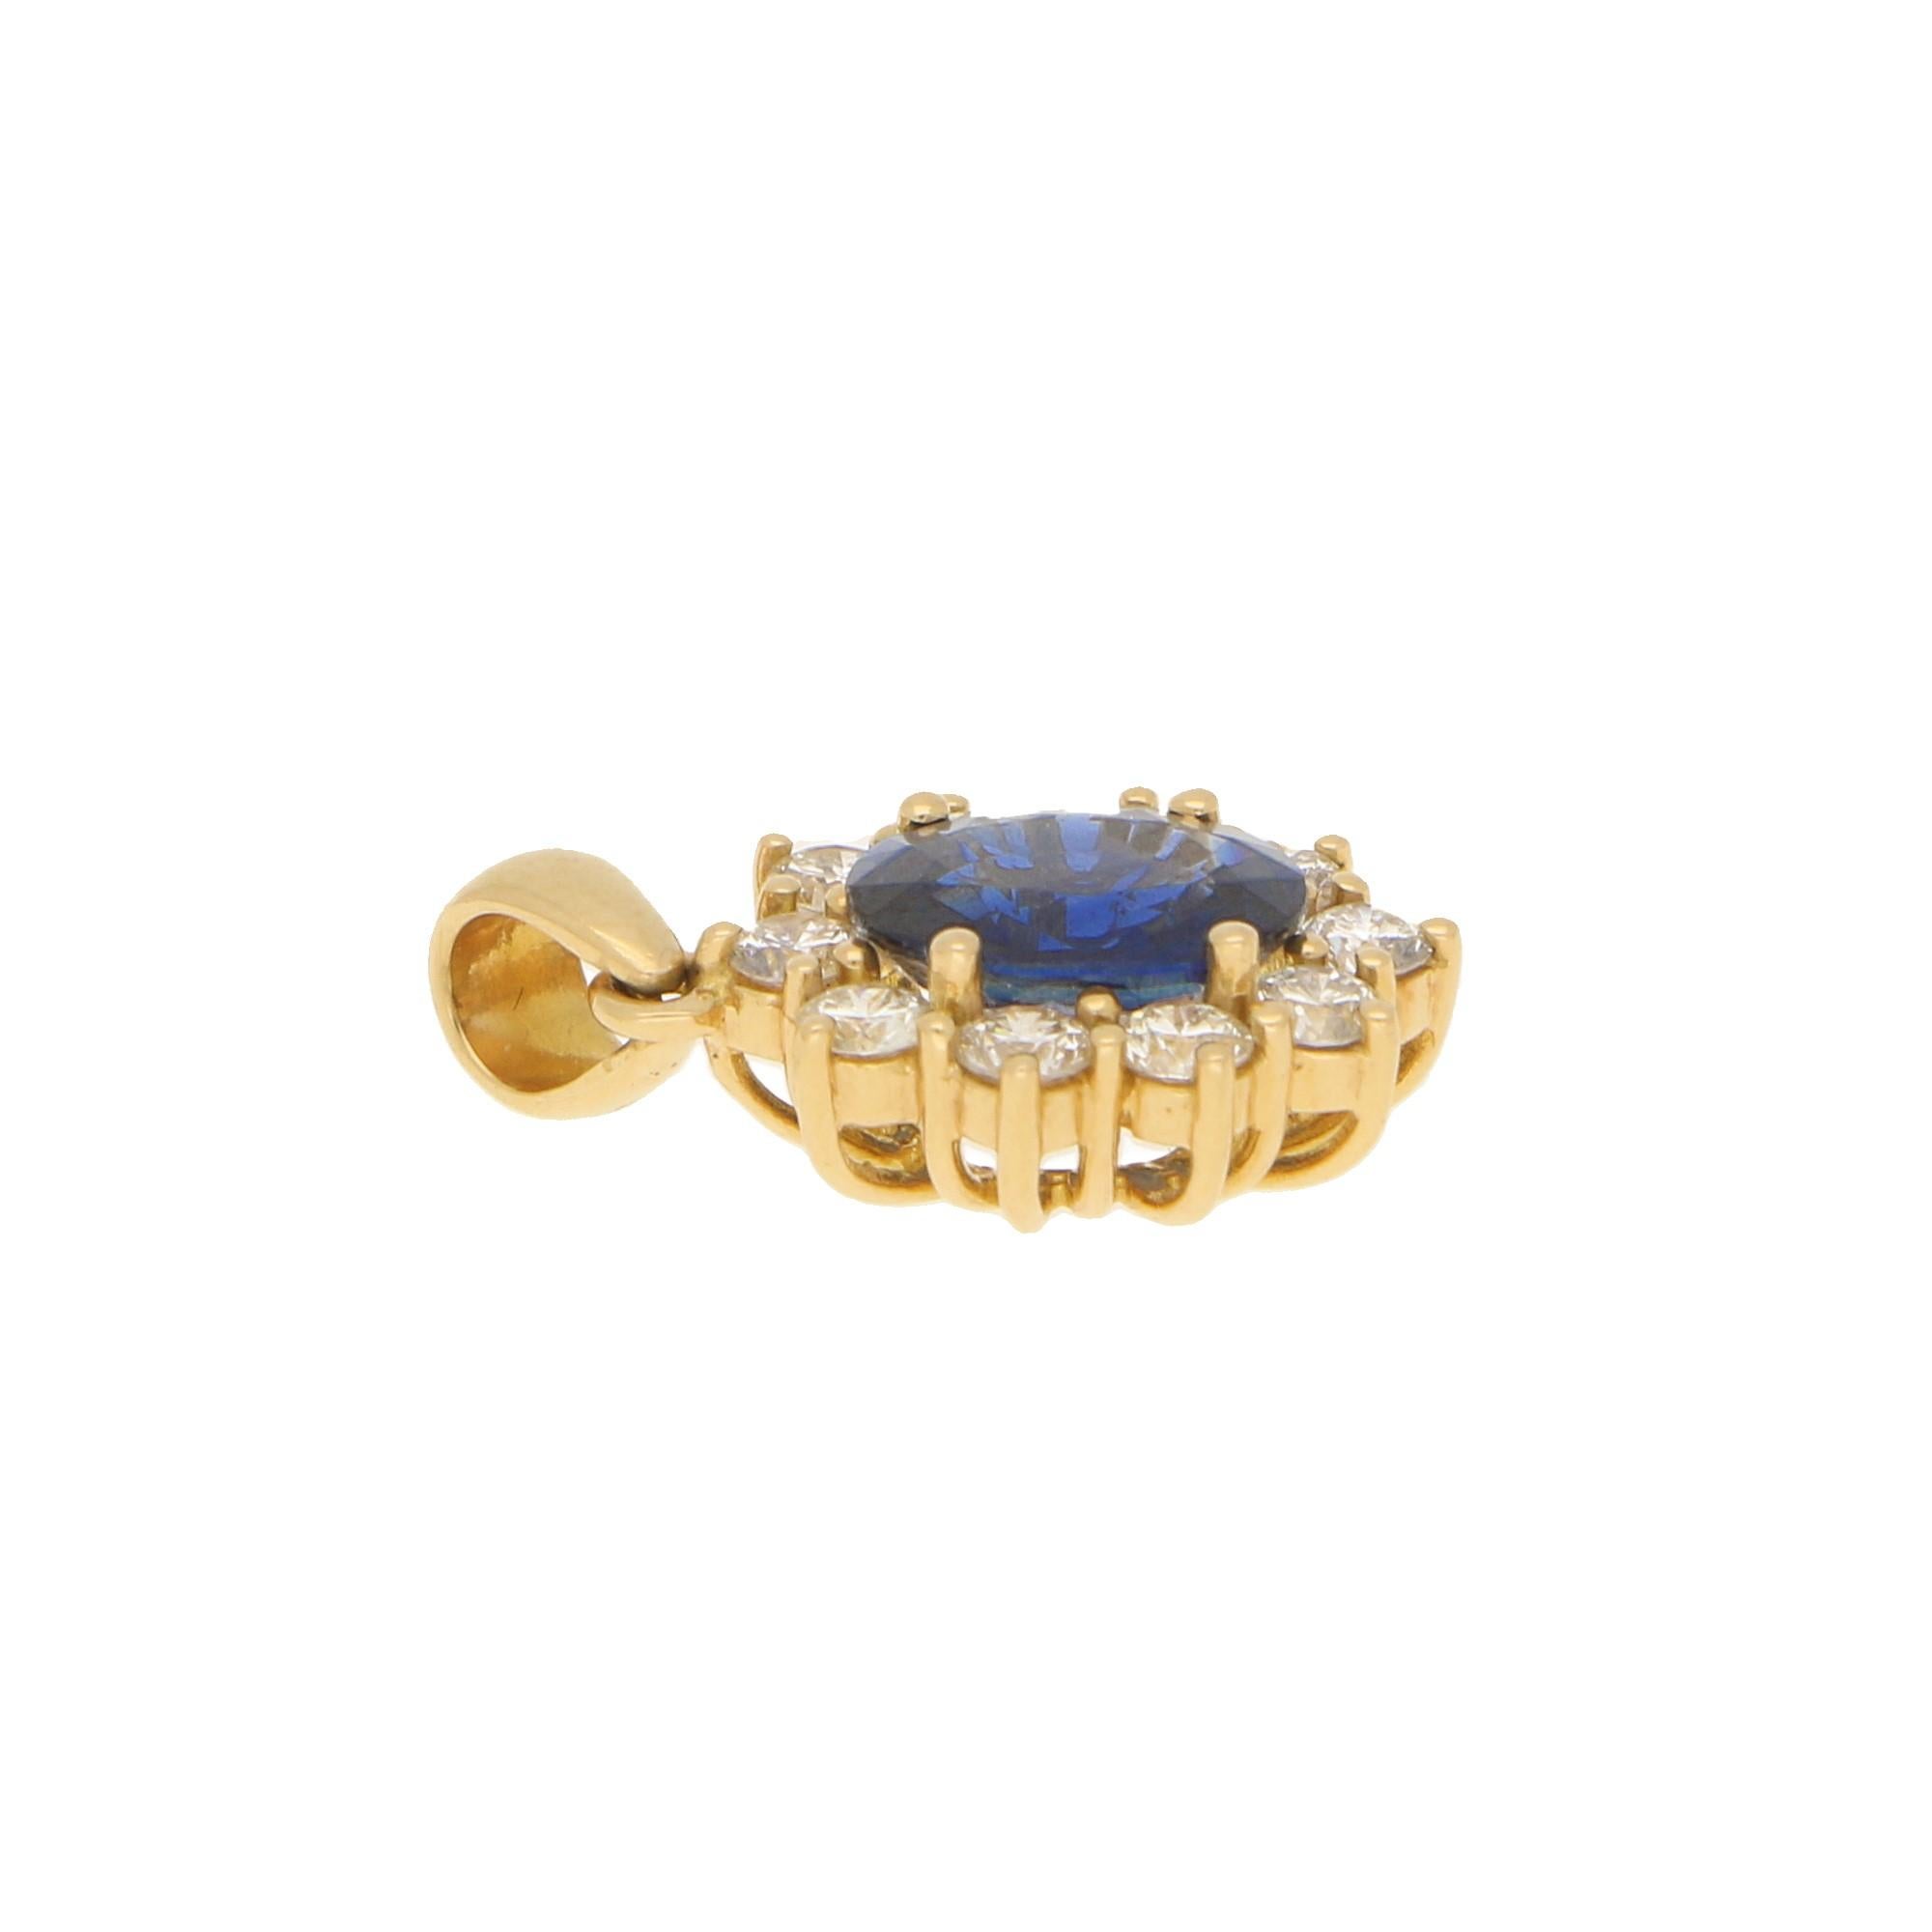 An elegant sapphire and diamond cluster pendant set in 18k yellow gold. 

The pendant centrally features and large royal blue coloured oval sapphire which is four claw set to centre. This oval sapphire is then surrounded by a halo of 10 round